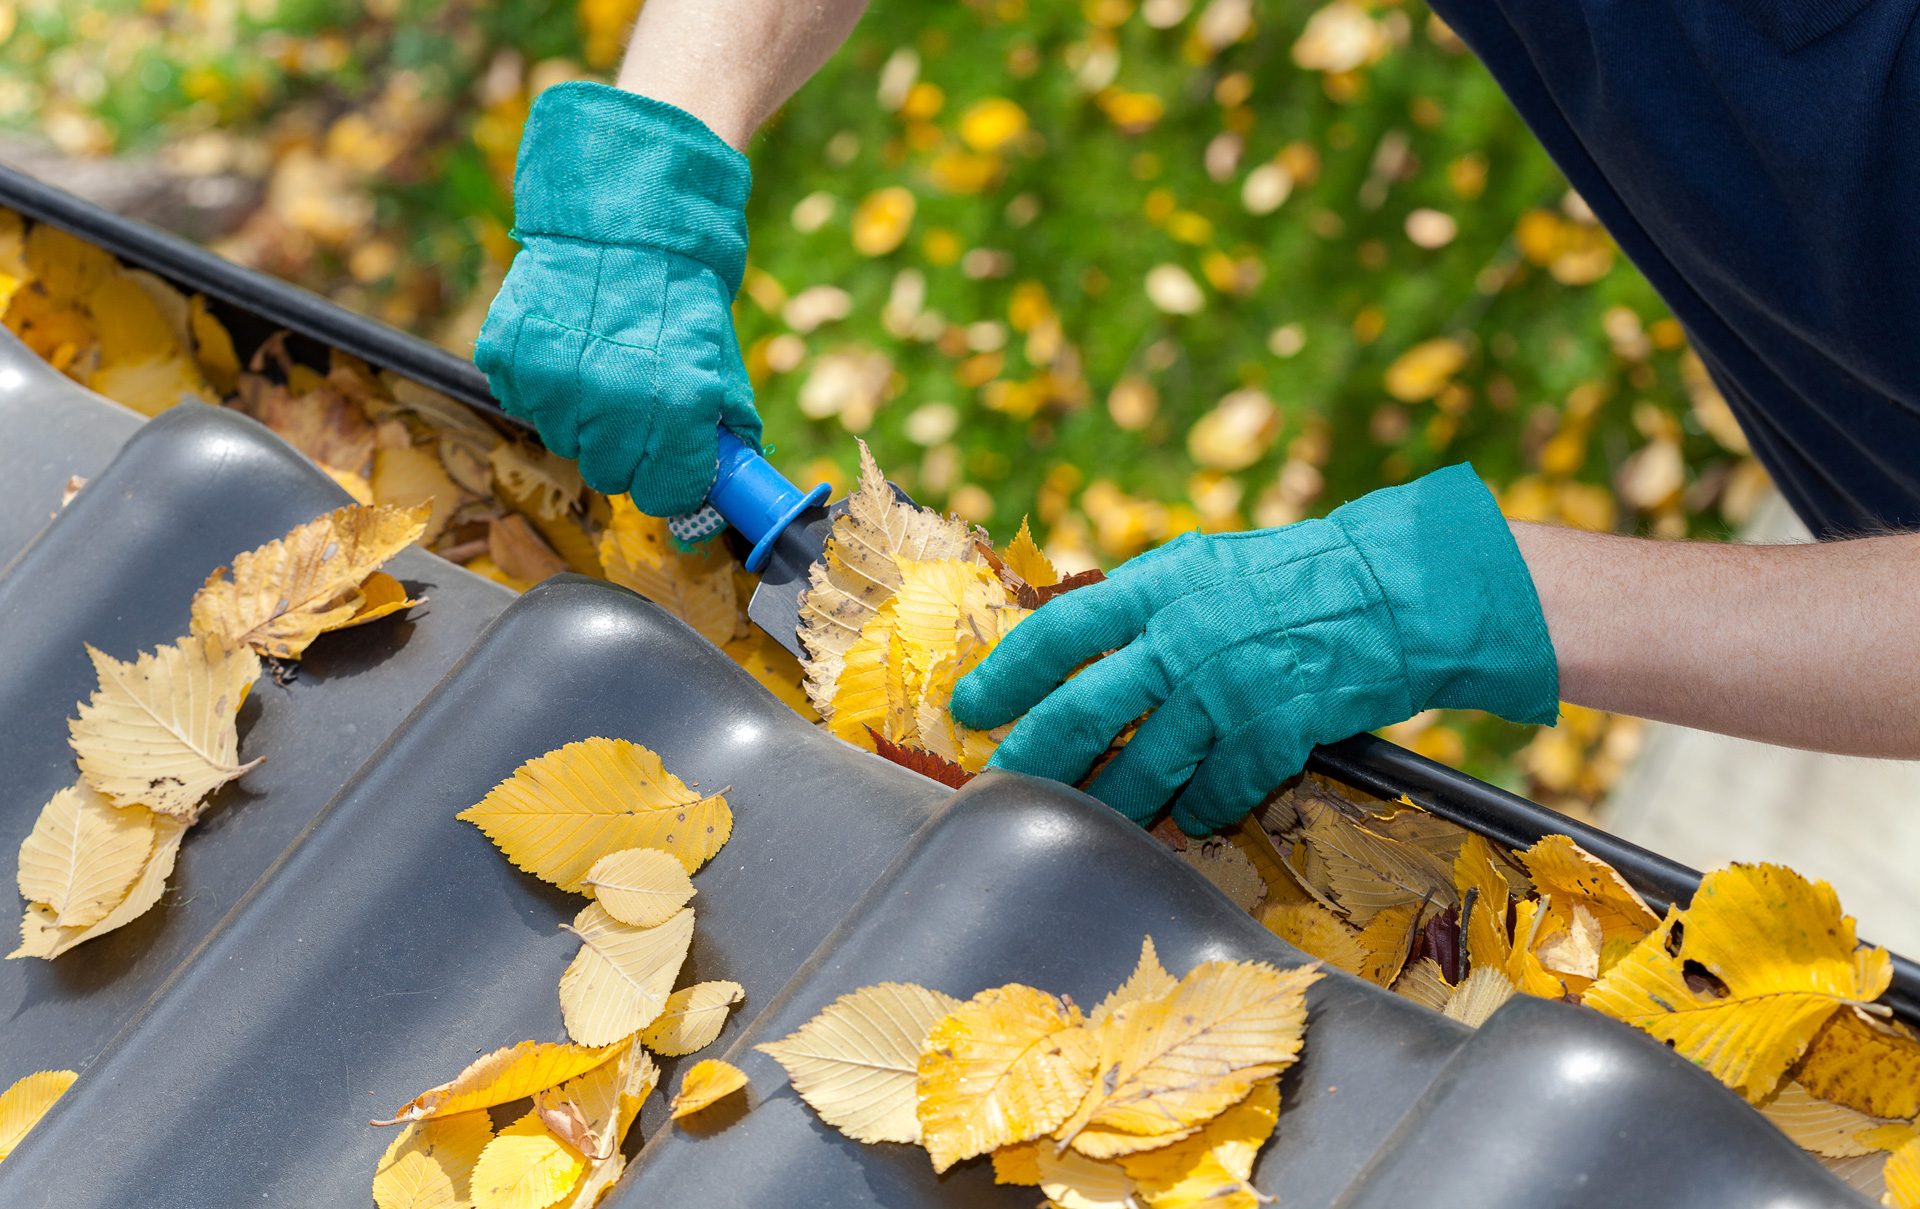 Done Right Gutter Cleaning & Repair: Gutter Cleaning and Gutter Repair in Santa Rosa, Petaluma and Windsor